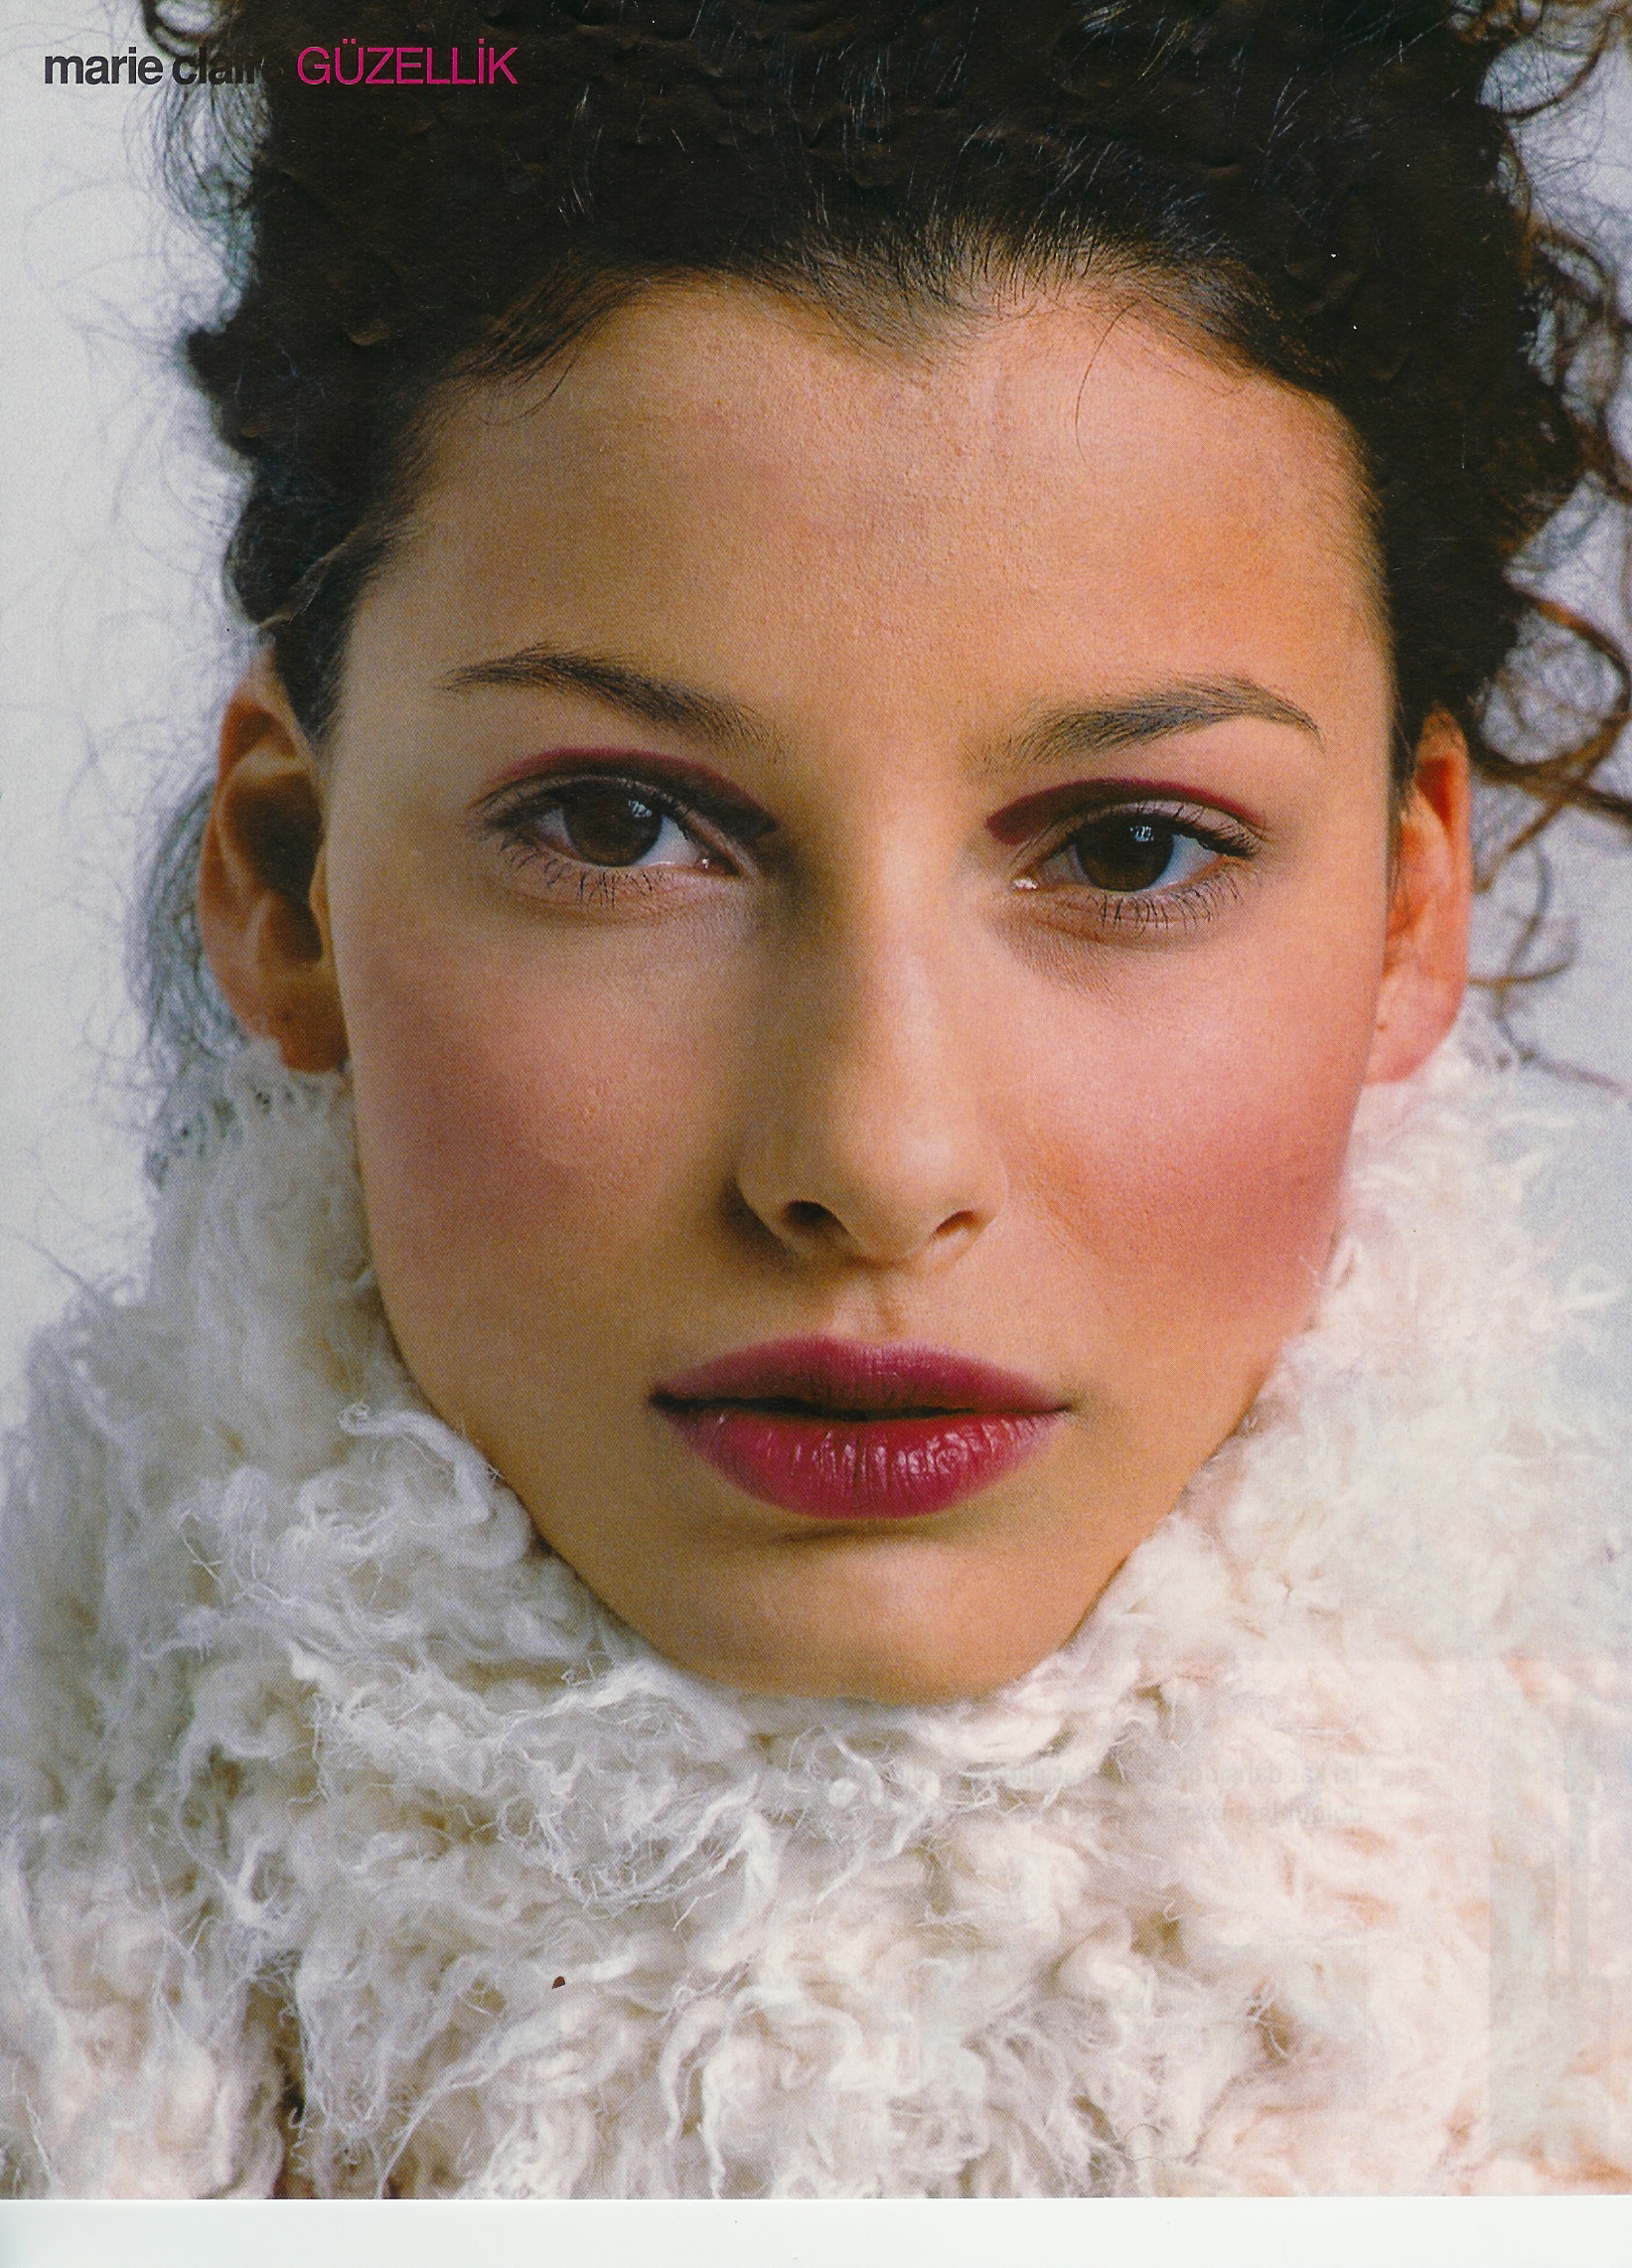 Marie Claire - 2001